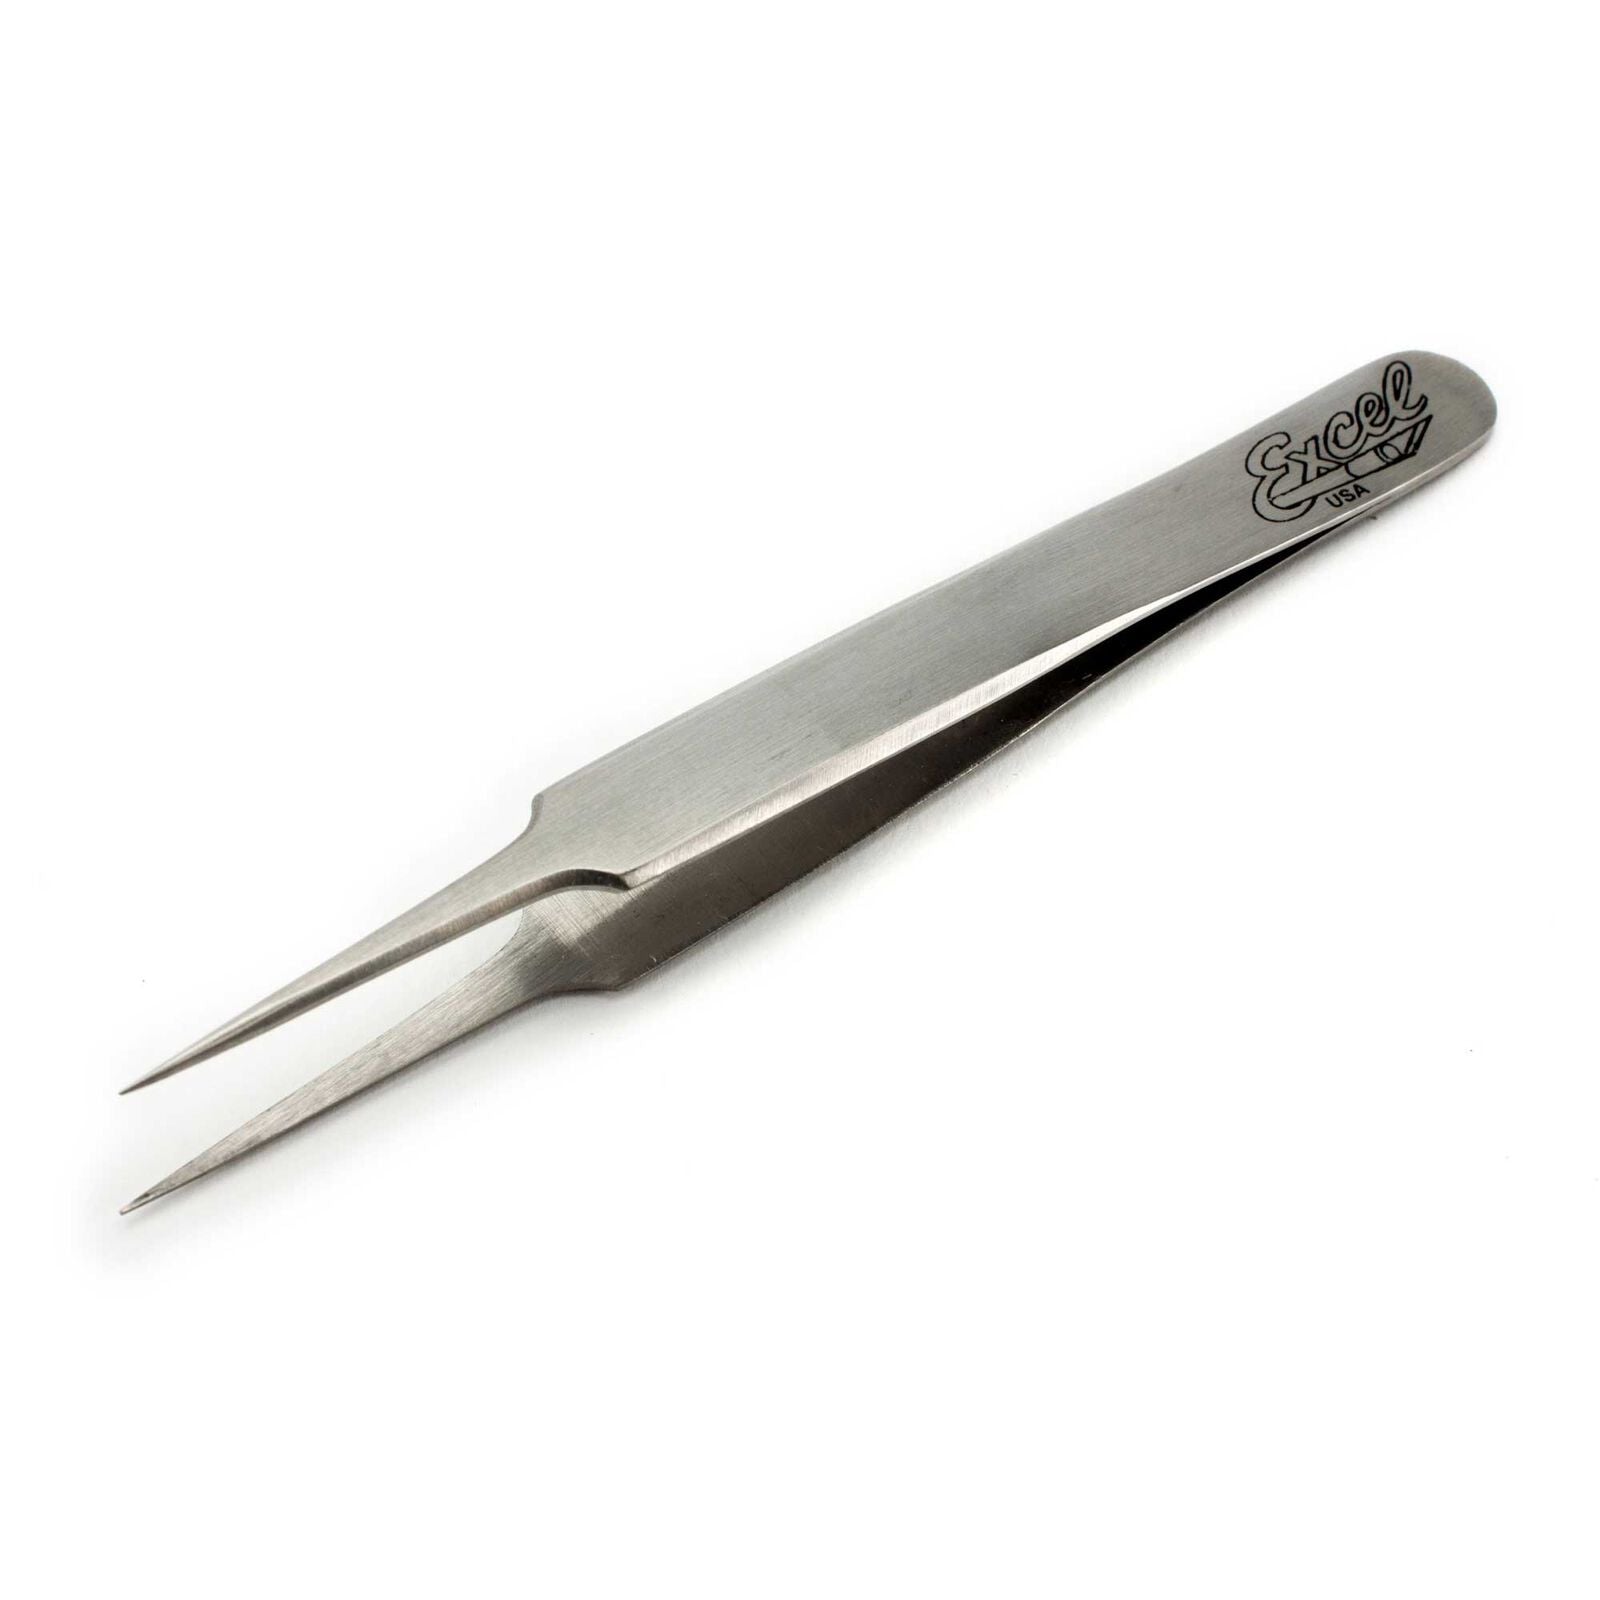 EXCEL 30418 Straight Point Tweezers, Polished